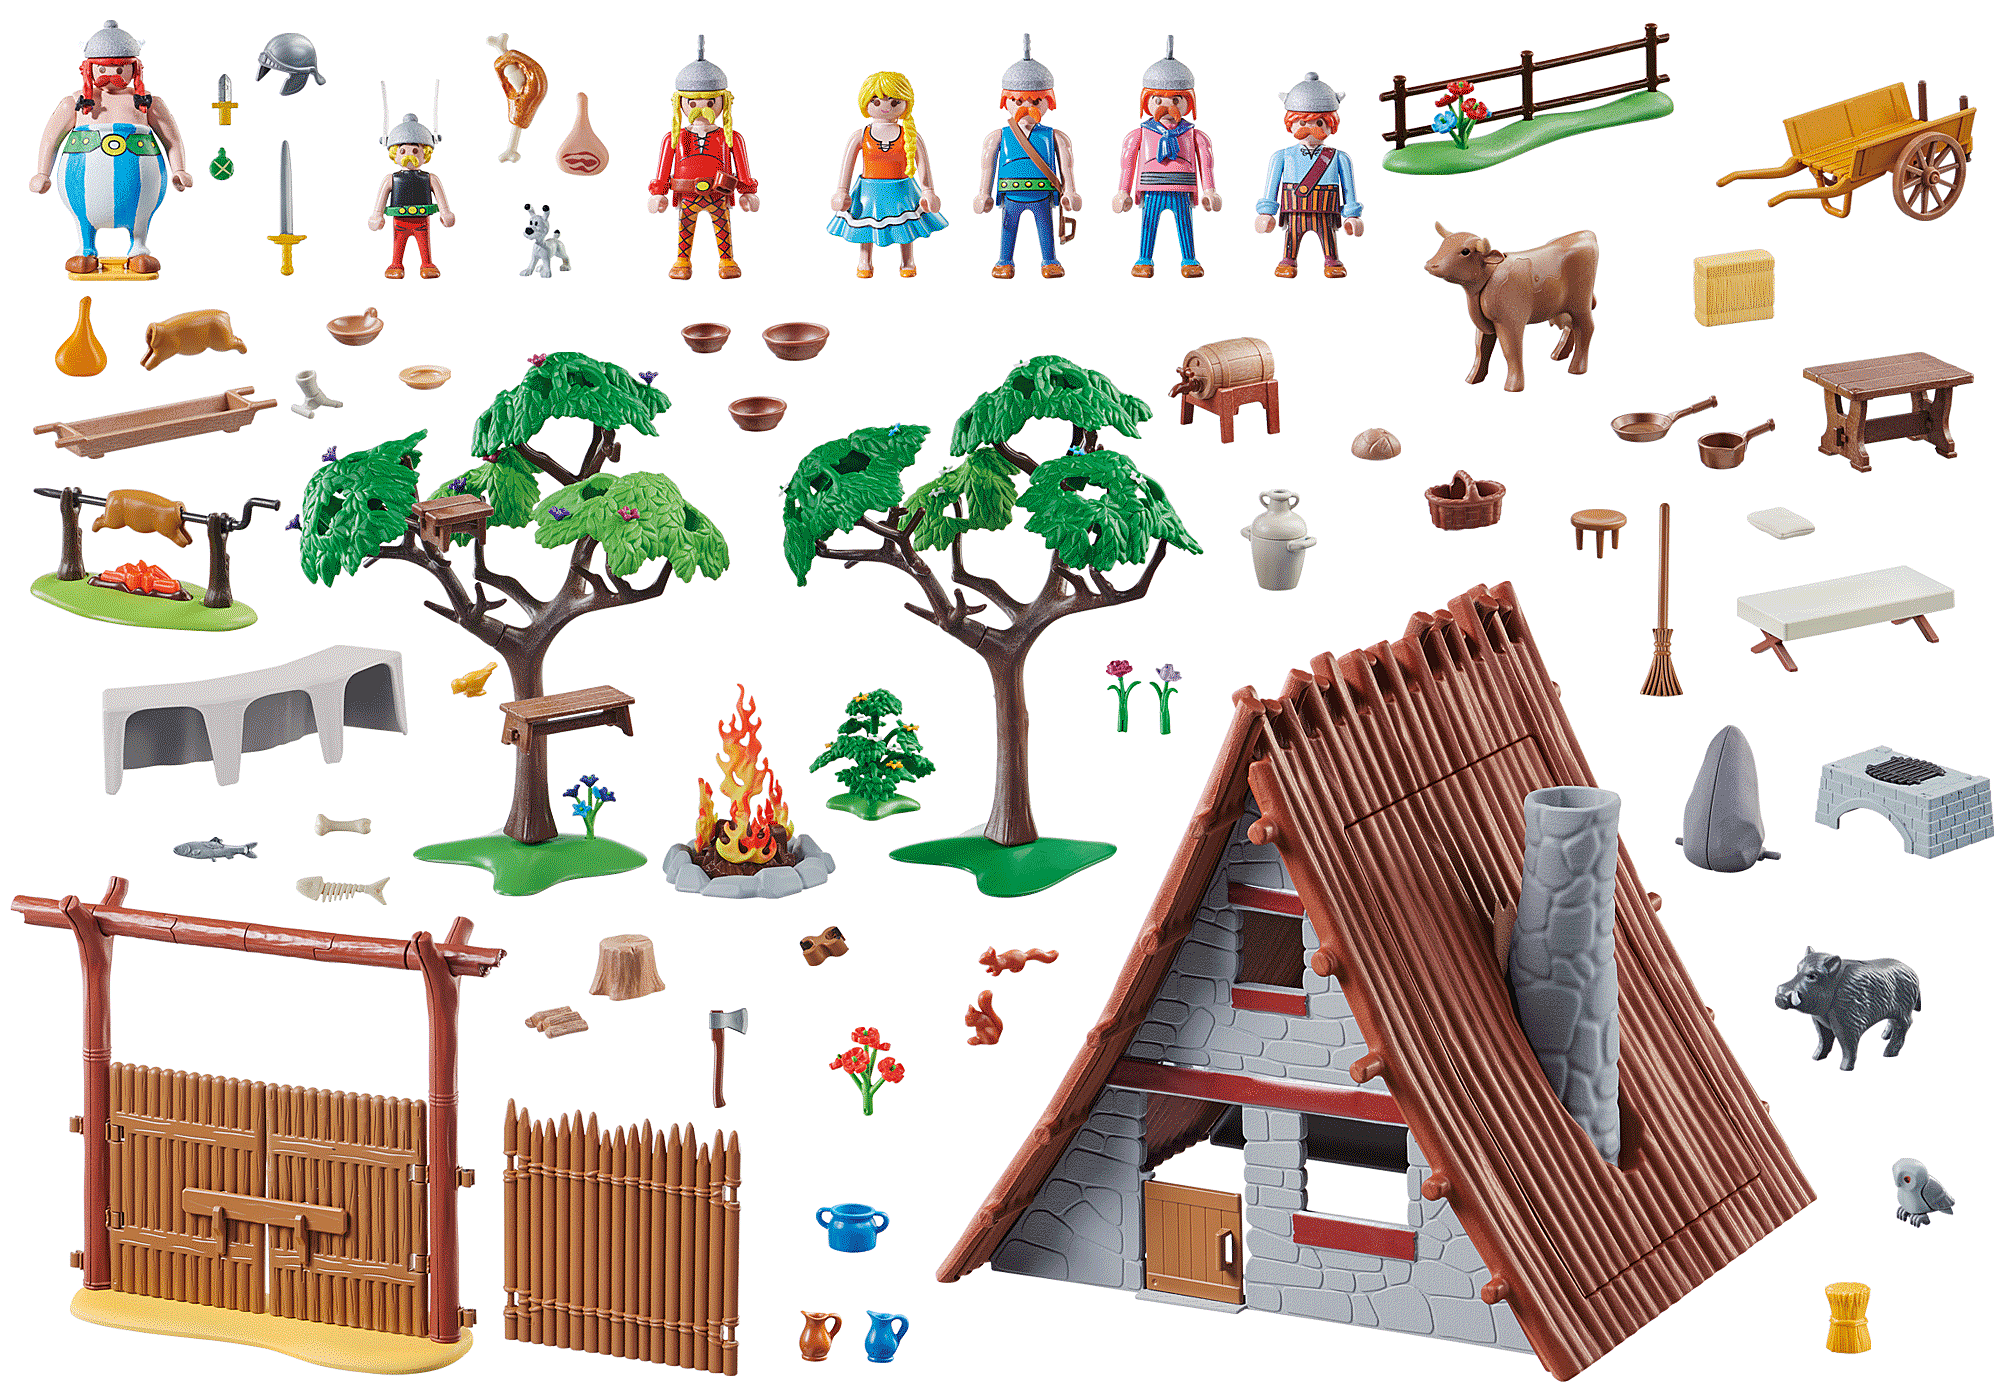 Playmobil Asterix - The Large Village party - 70931 - 310 Parts